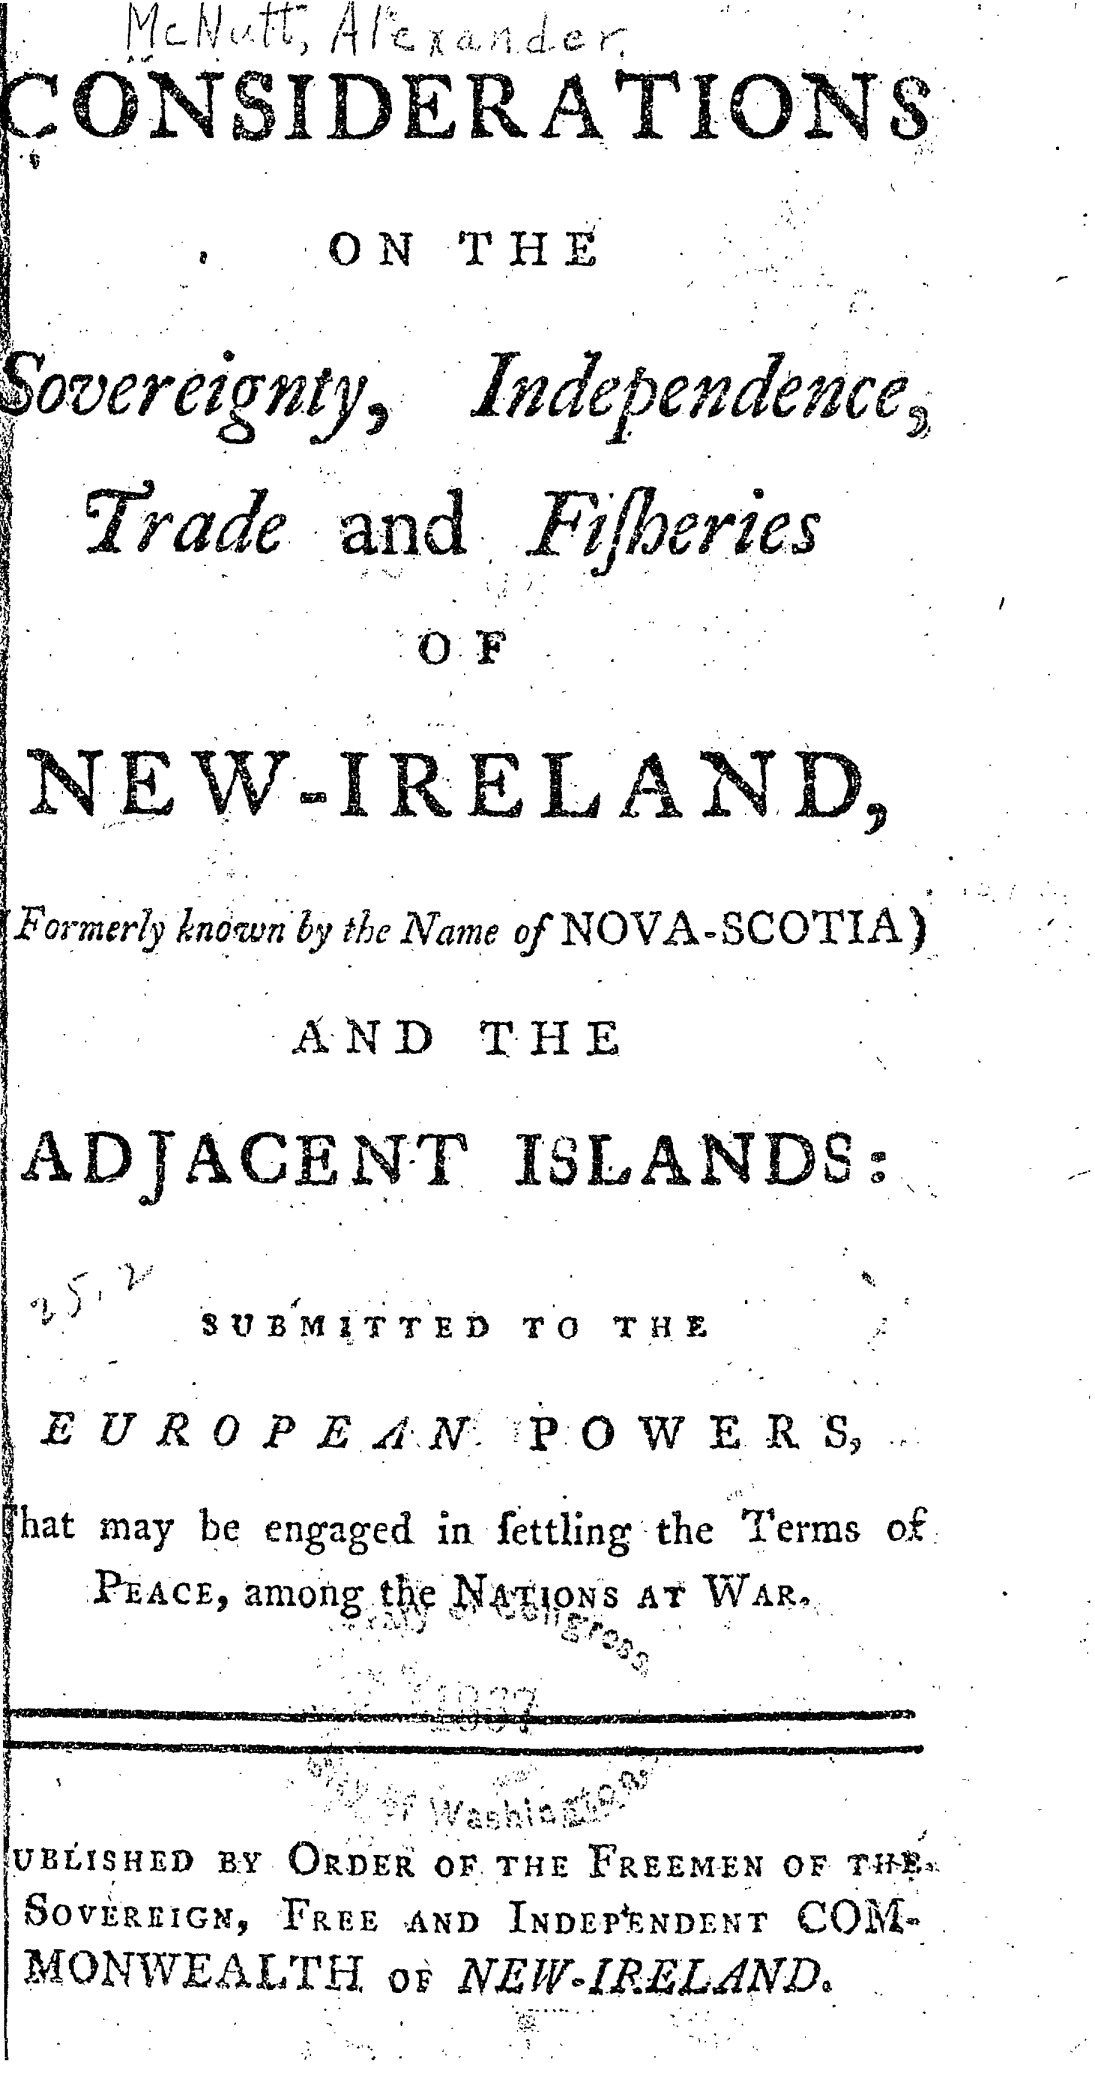 The title page from McNutt&rsquo;s Considerations on the Sovereignty, Independence, Trade and Fisheries of New Ireland